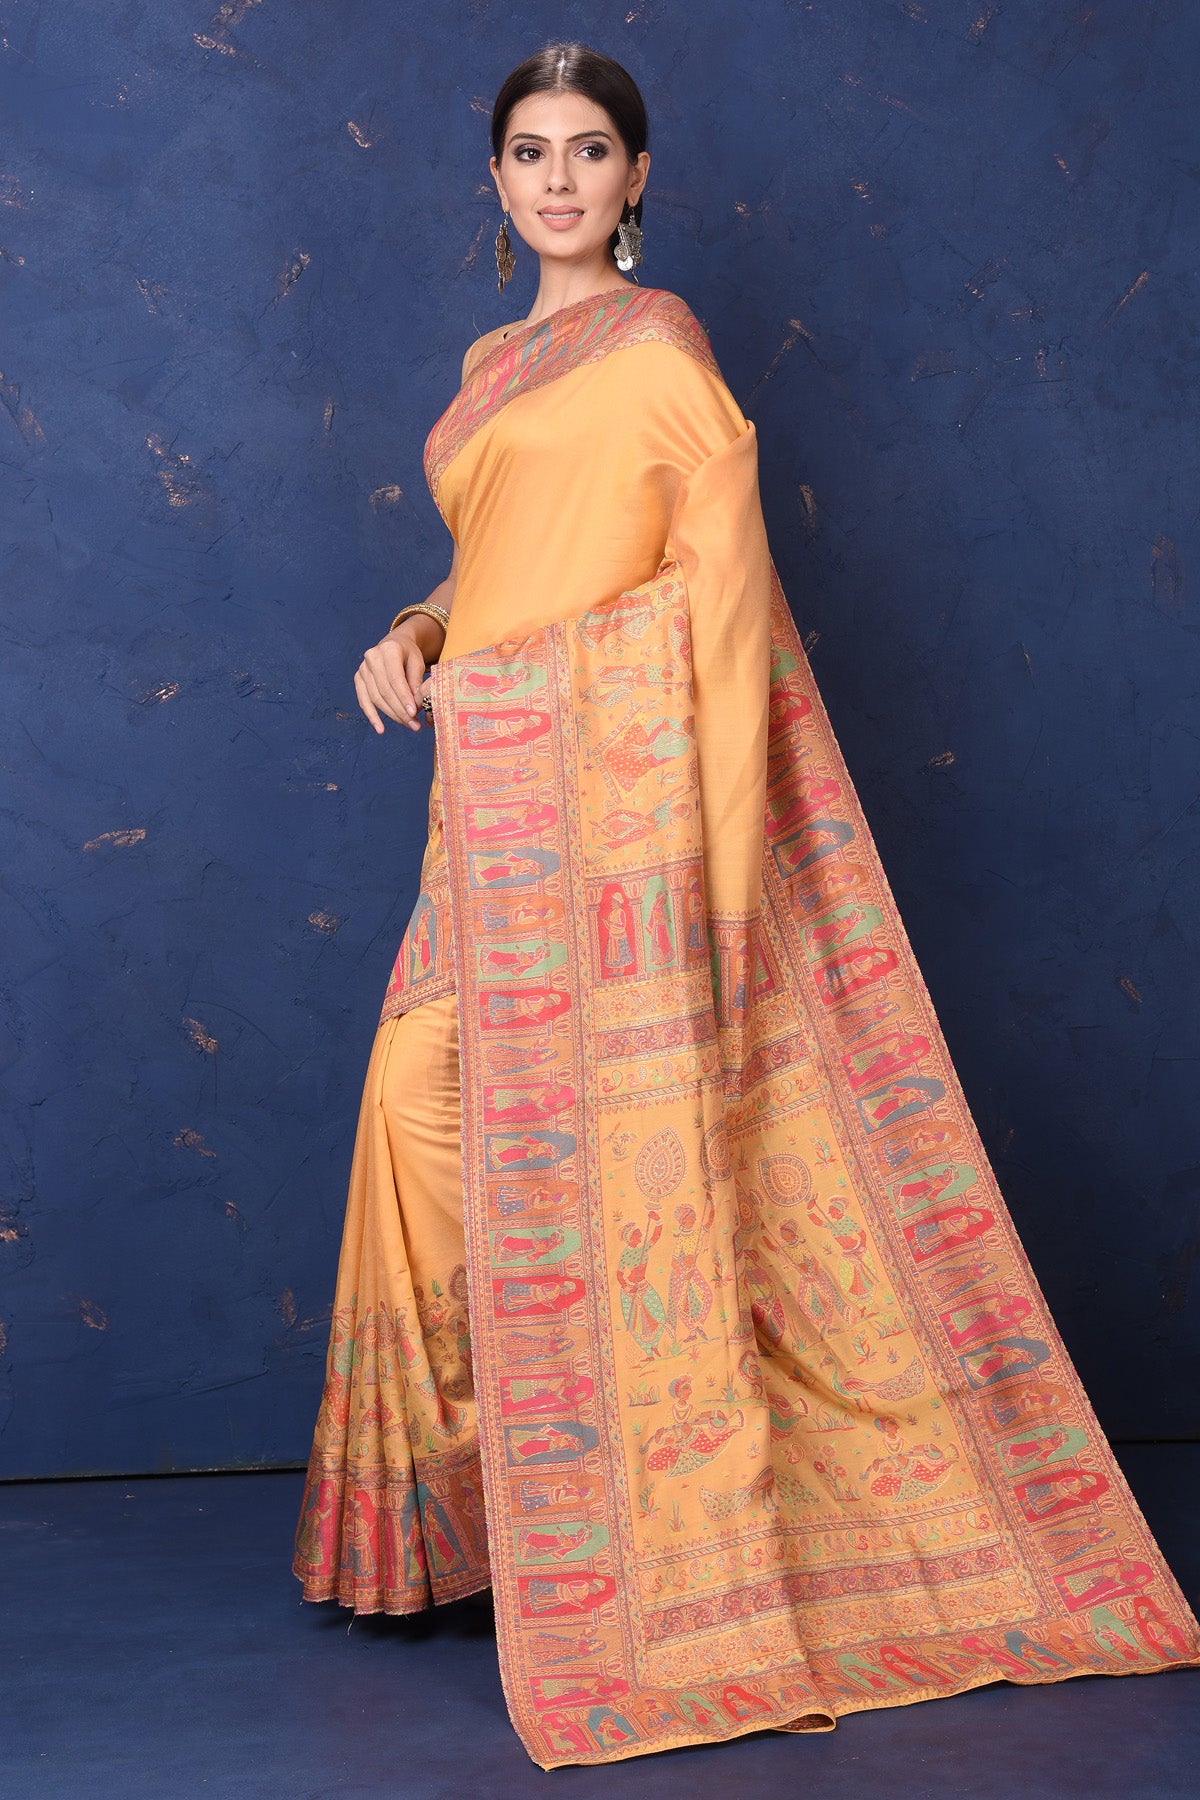 Shop stunning yellow Kani weave tussar muga silk saree online in USA. Buy latest designer sarees, handloom saris, embroidered sarees, Bollywood sarees, fancy sarees for special occasions from Pure Elegance Indian fashion store in USA. Shop soft silk sarees, pure Banarasi sarees, cotton sarees, georgette sarees. -pallu